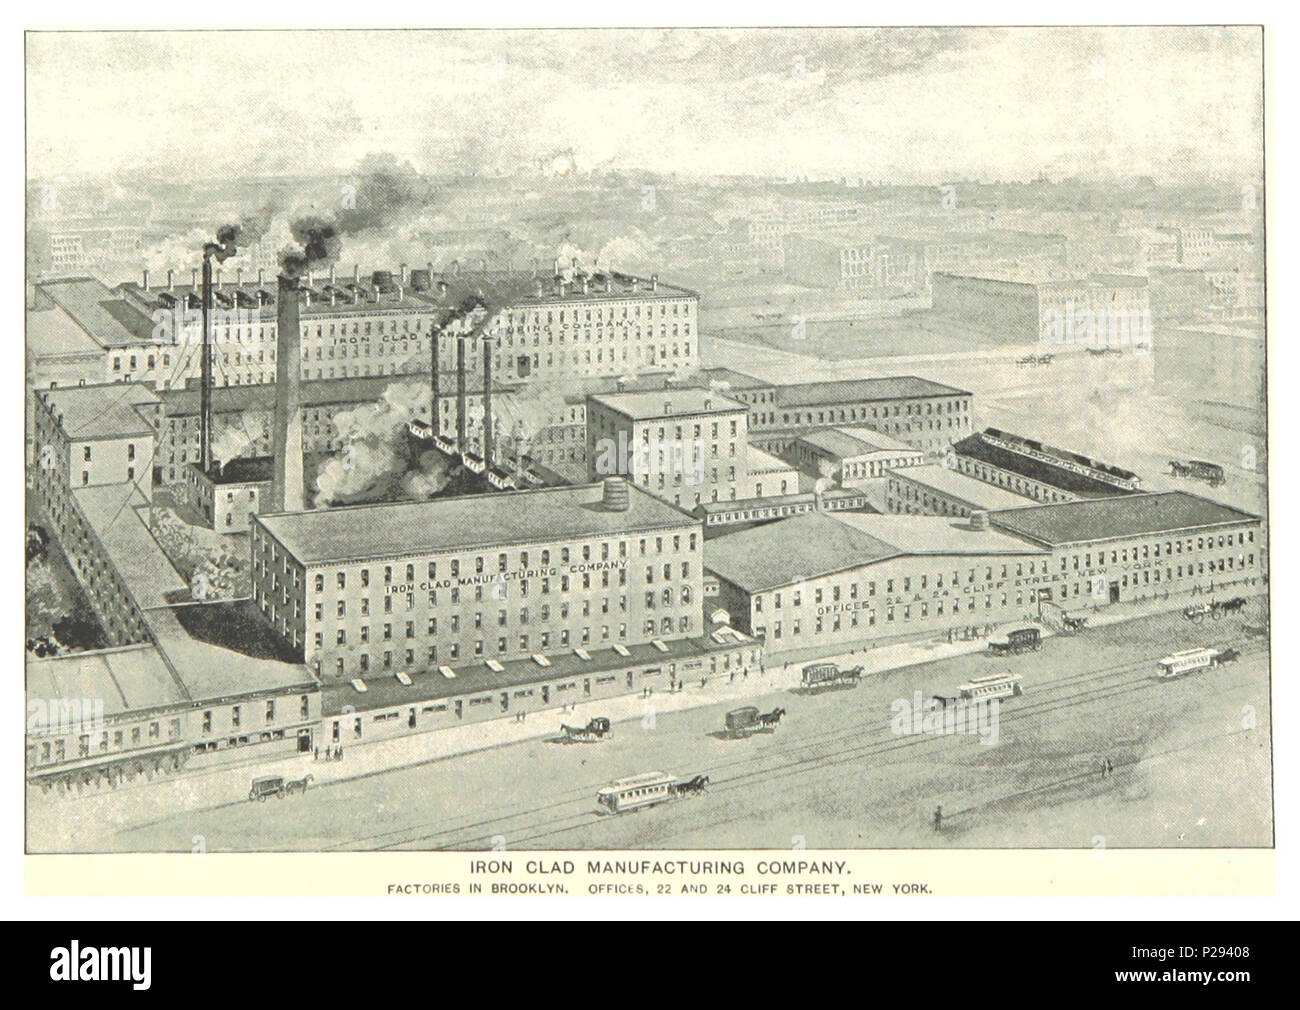 (King1893NYC) pg941 IRON CLAD MANUFACTORING COMPANY, FACTORIES IN BROOKLYN. Stock Photo